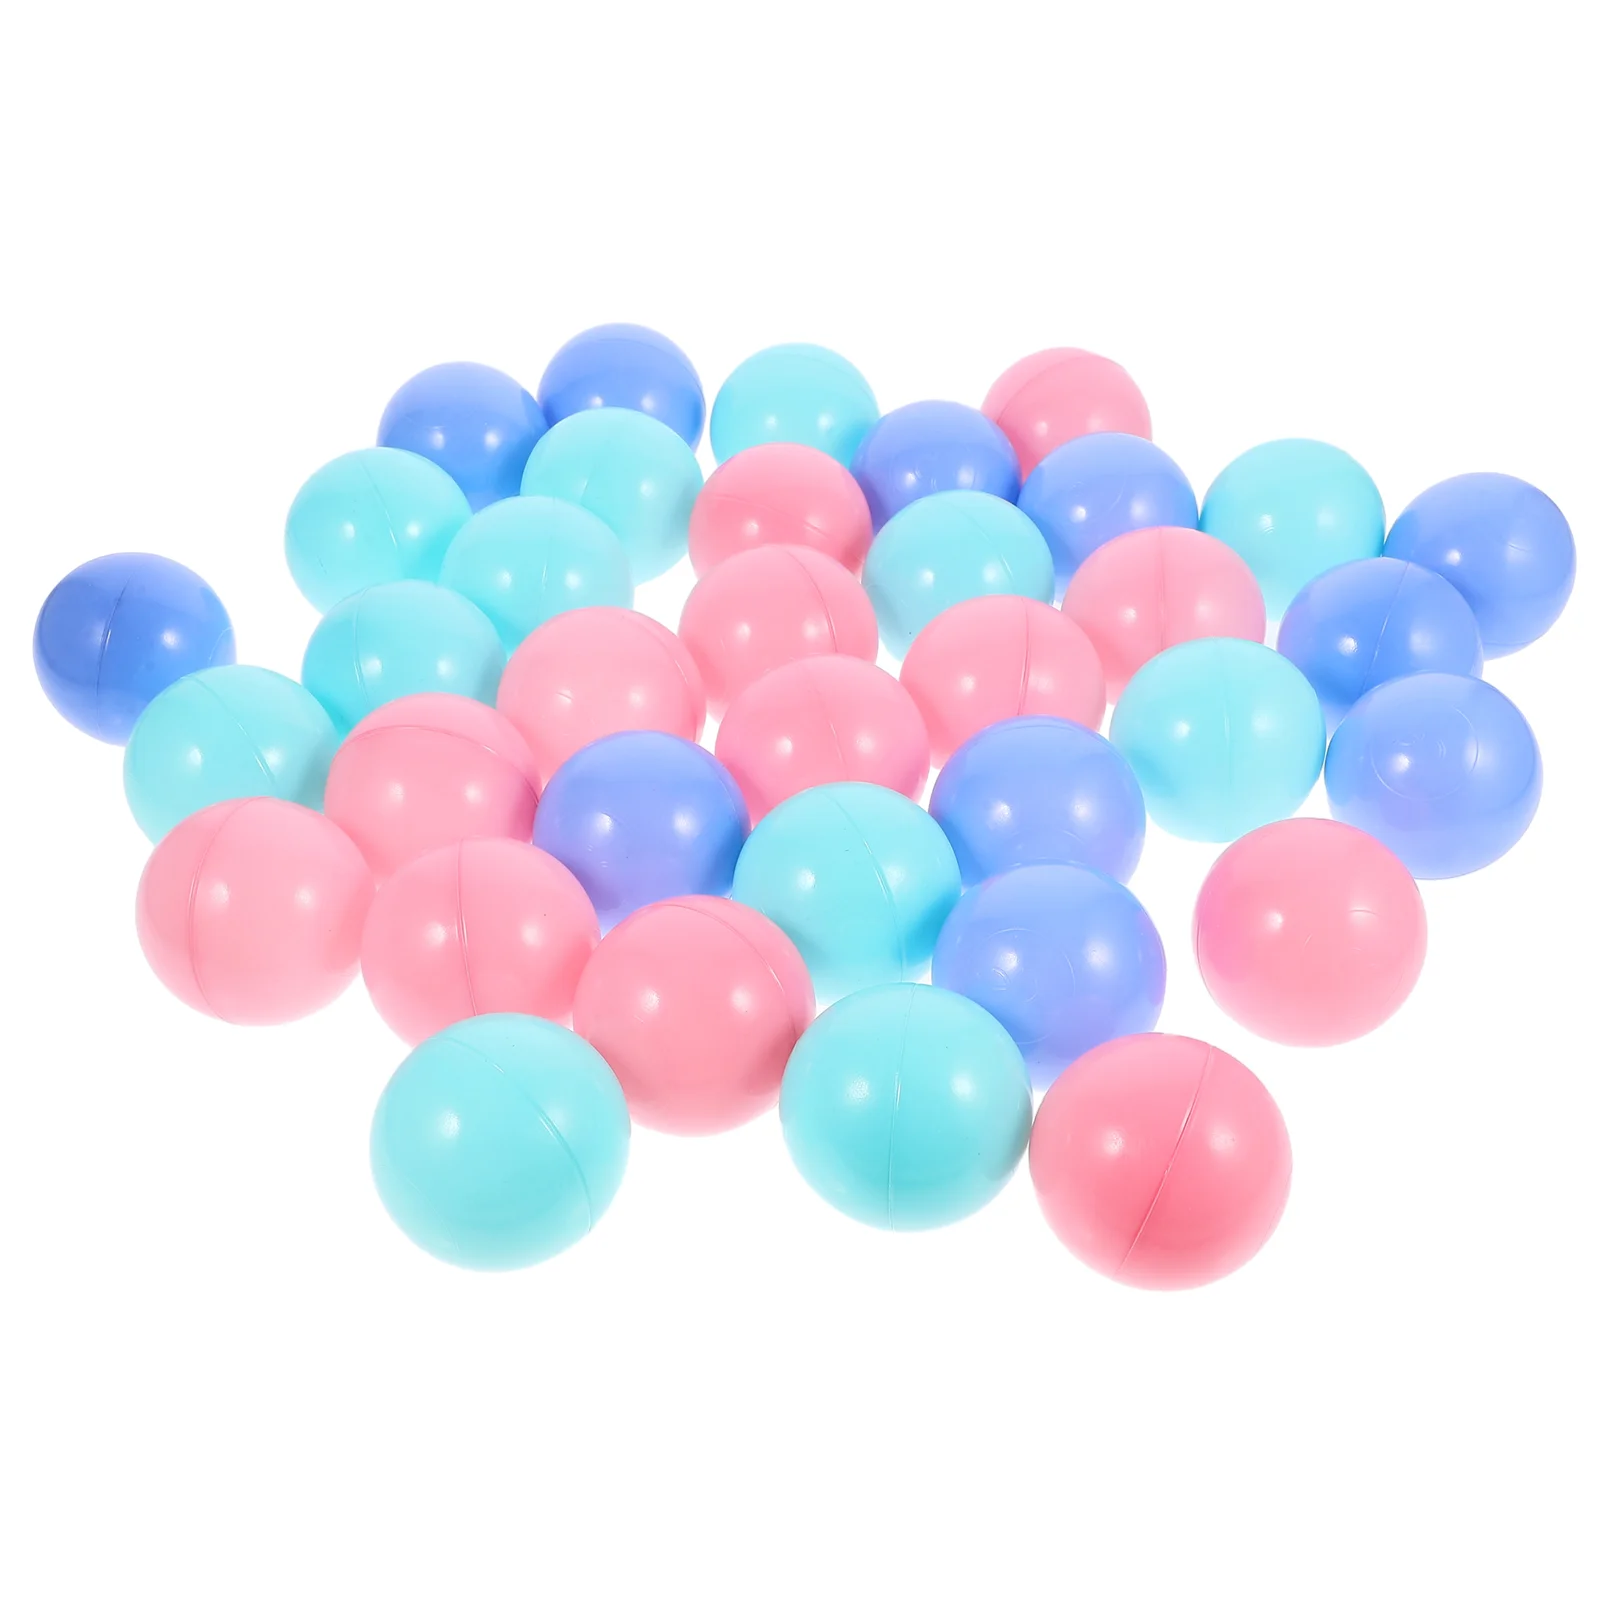 

100 Pcs Toys Children's Macaron Ball Ocean Balls Funny Round Educational Swimming Pits Small Plastic Play for Creative